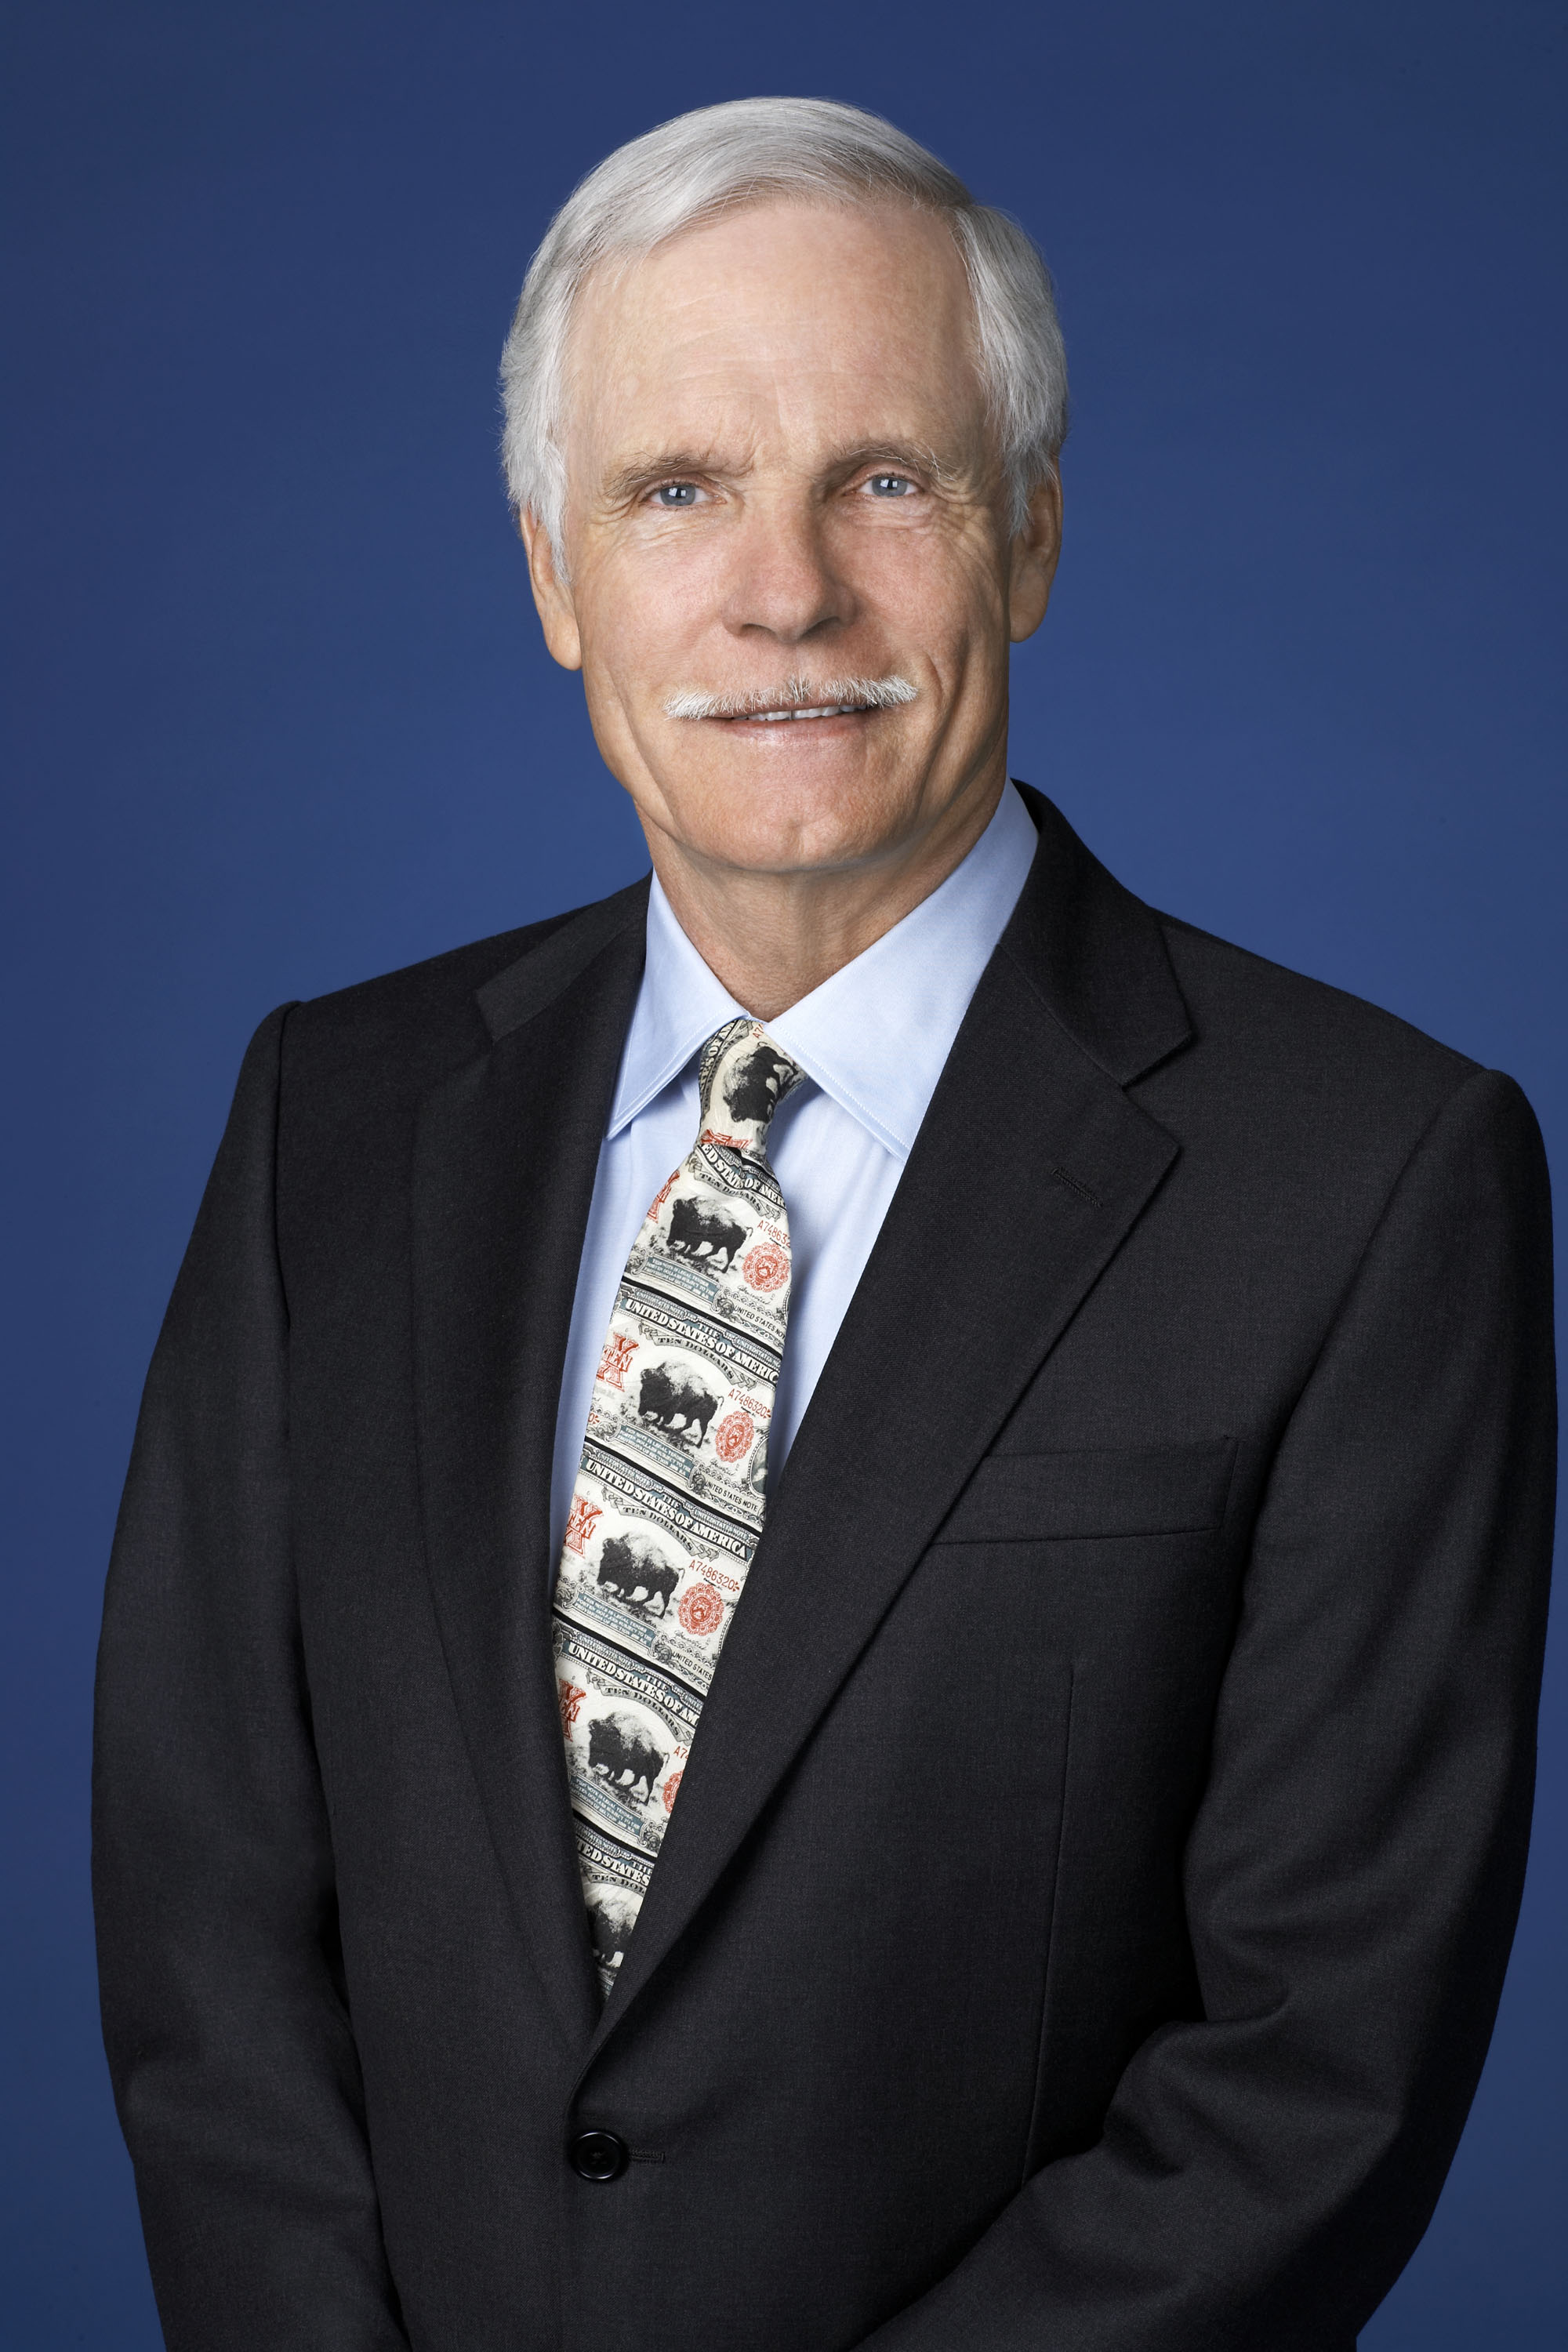 Special Message from Ted Turner – August 6, 2015